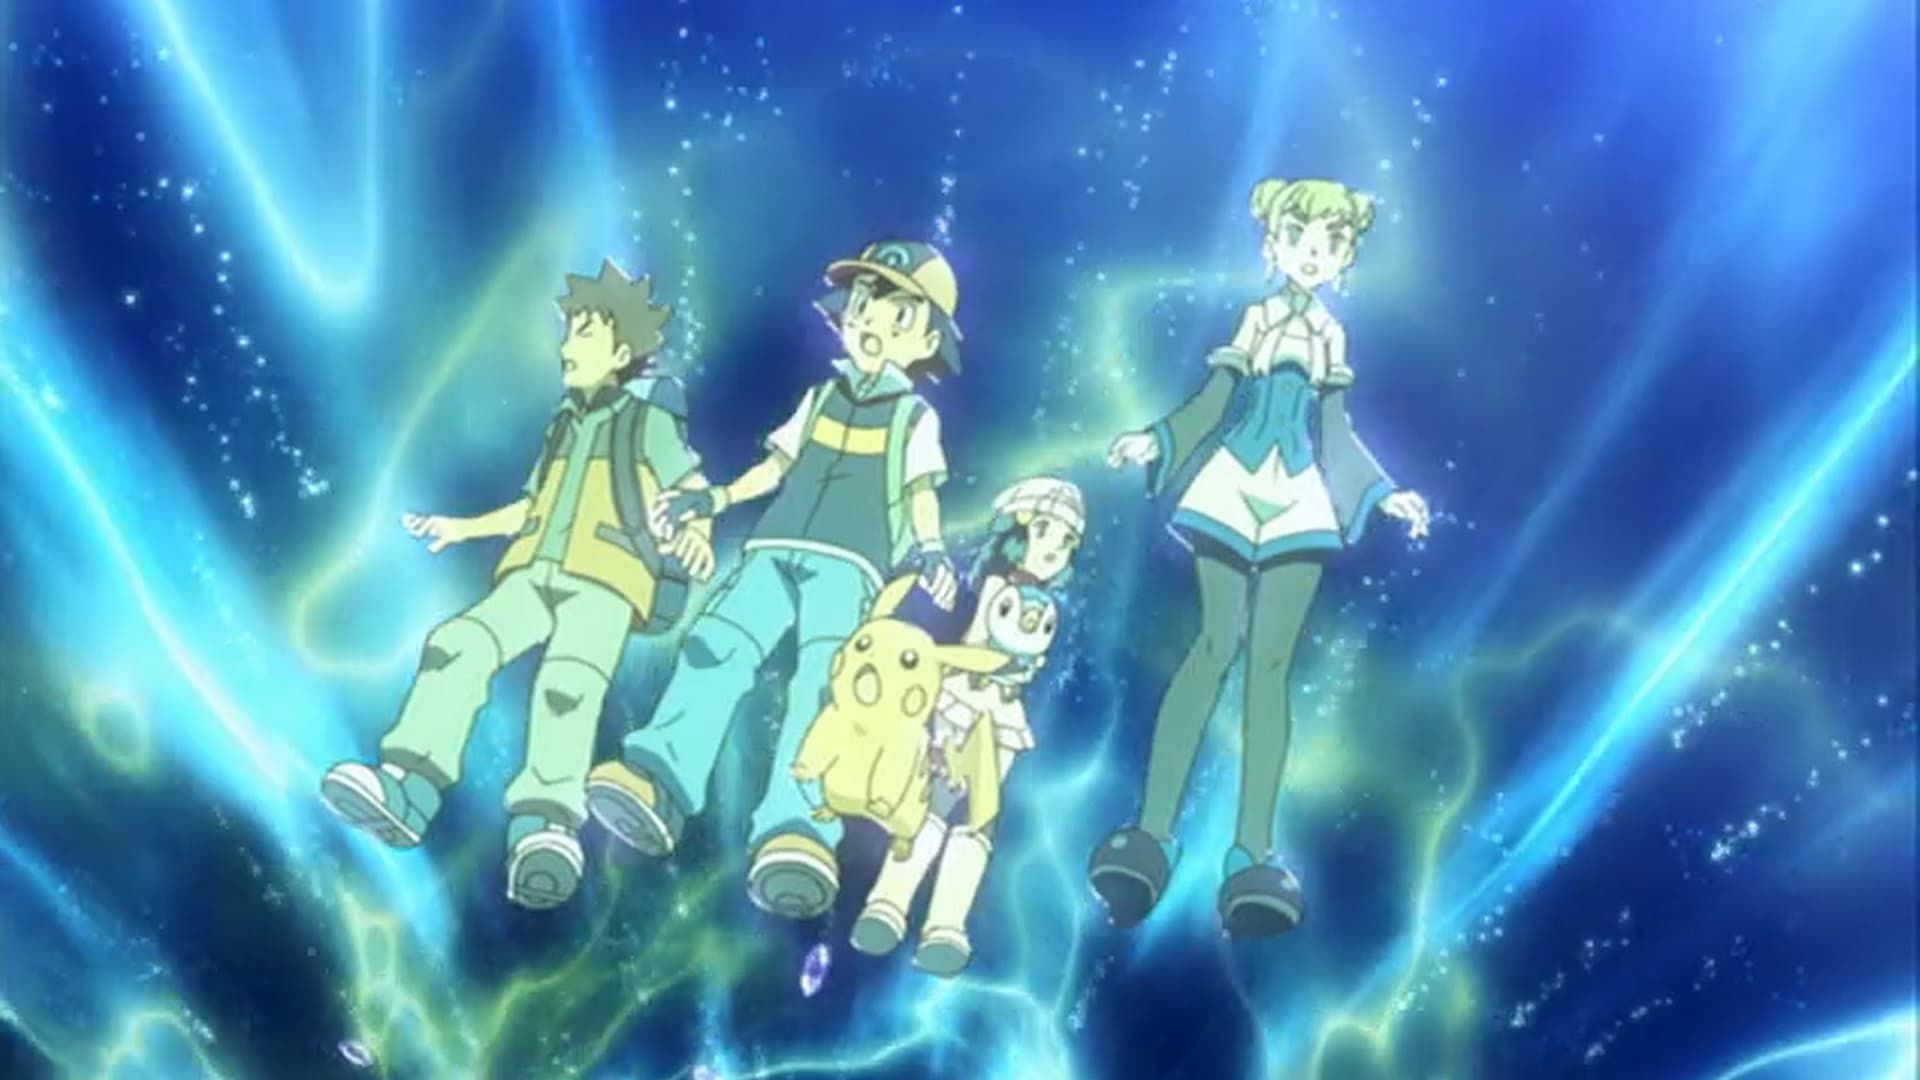 Time travel in the anime (image via The Pokemon Company)